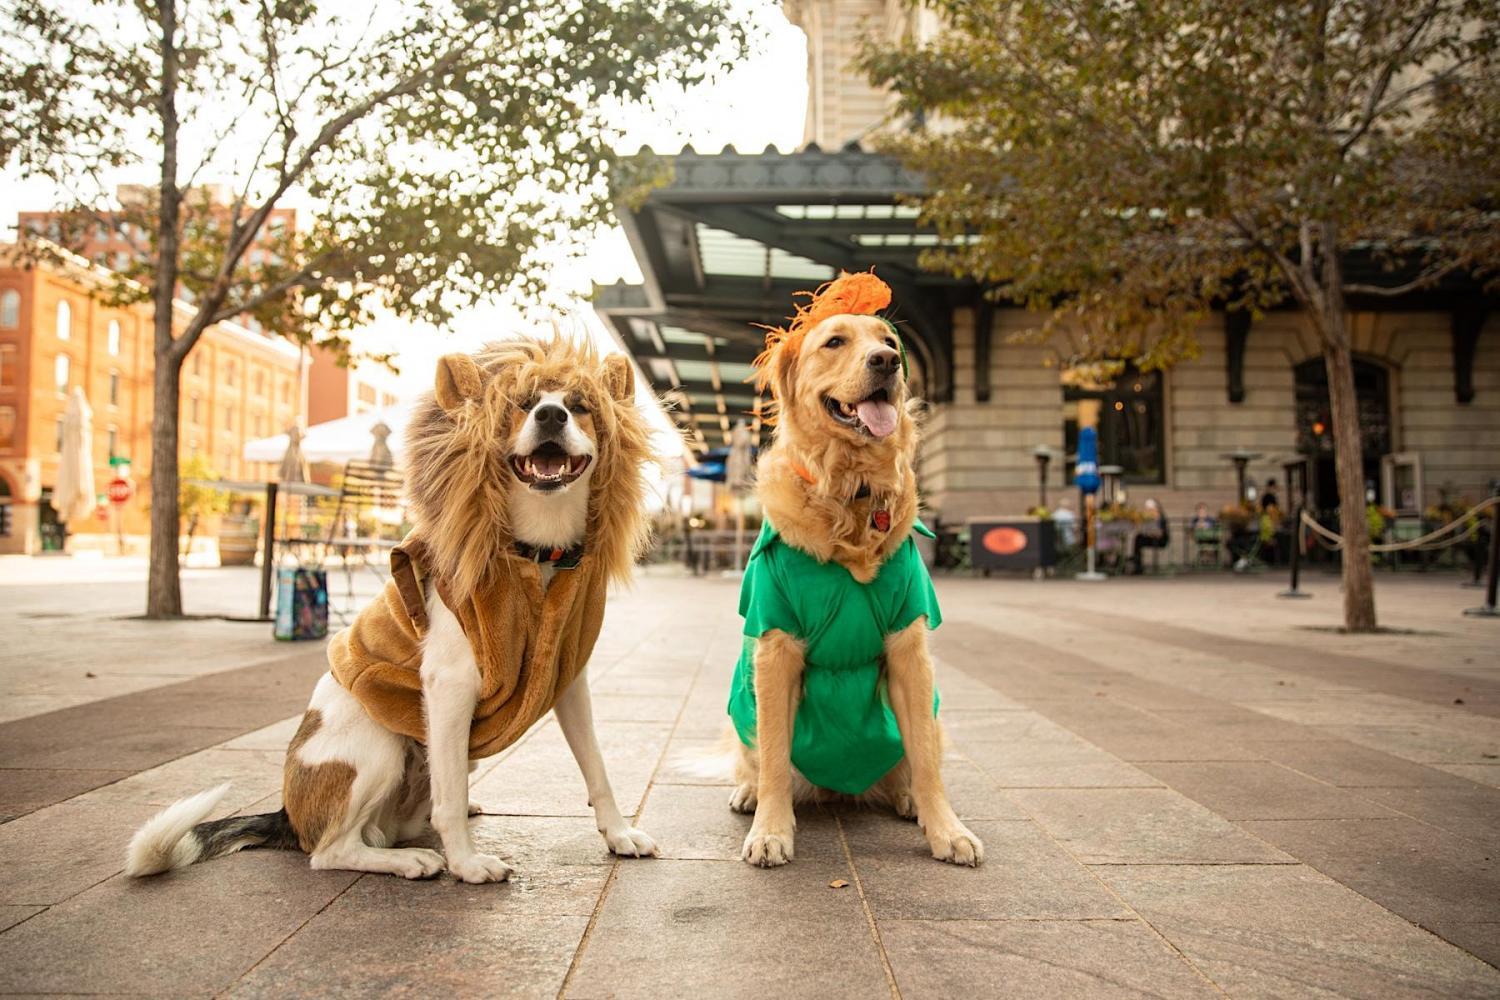 Howl-a-Ween Pet Parade at Denver Union Station
Mon Oct 24, 7:00 PM - Mon Oct 24, 7:00 PM
in 5 days